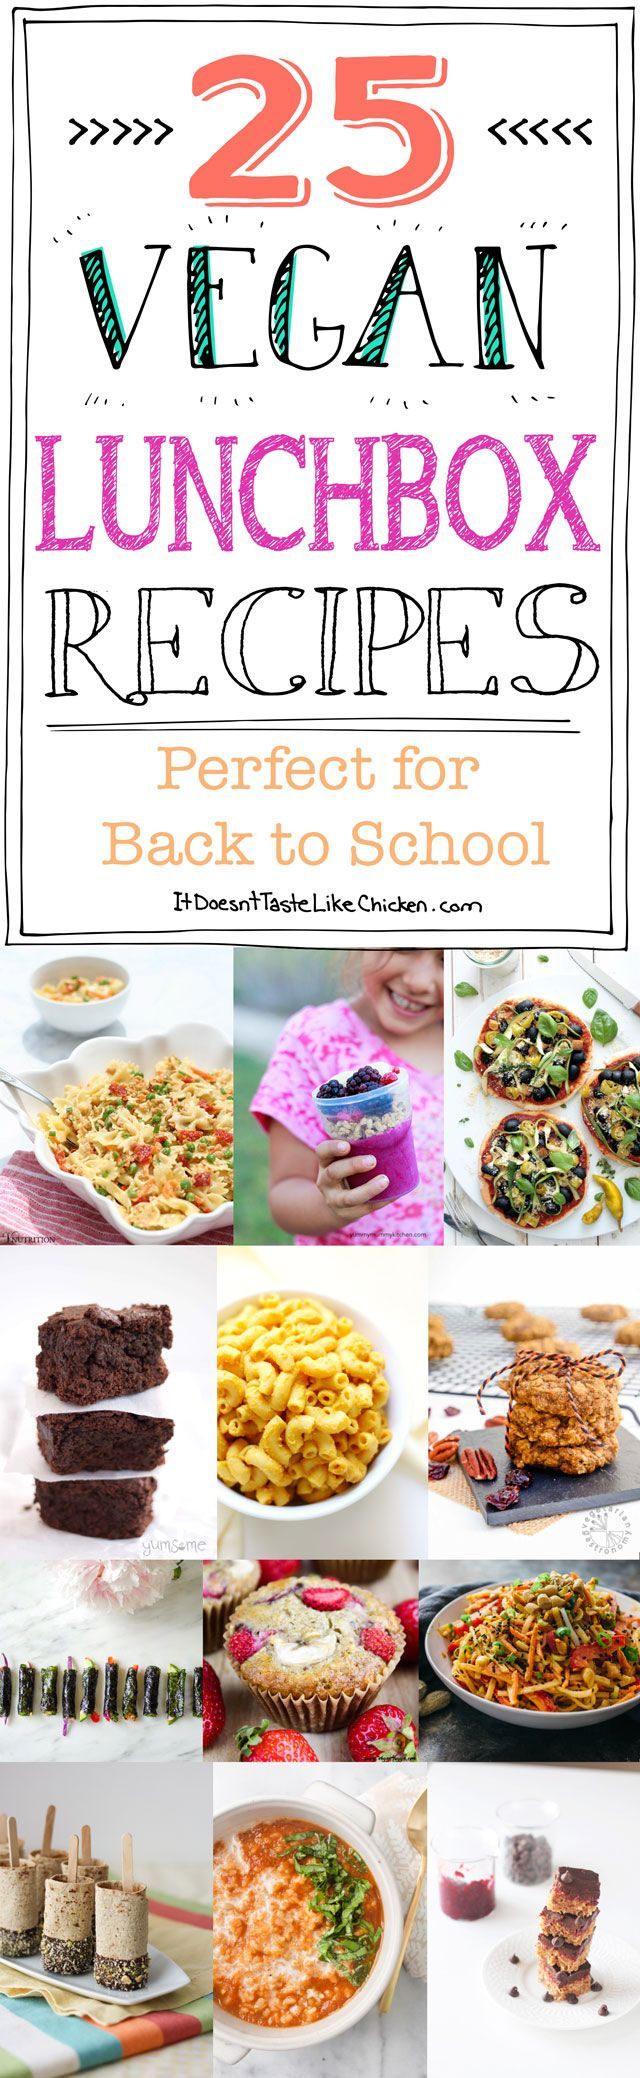 25 Vegan Lunchbox Recipes – Perfect for Back to School. Lots of kid-friendly lunch ideas that are so much better than peanut